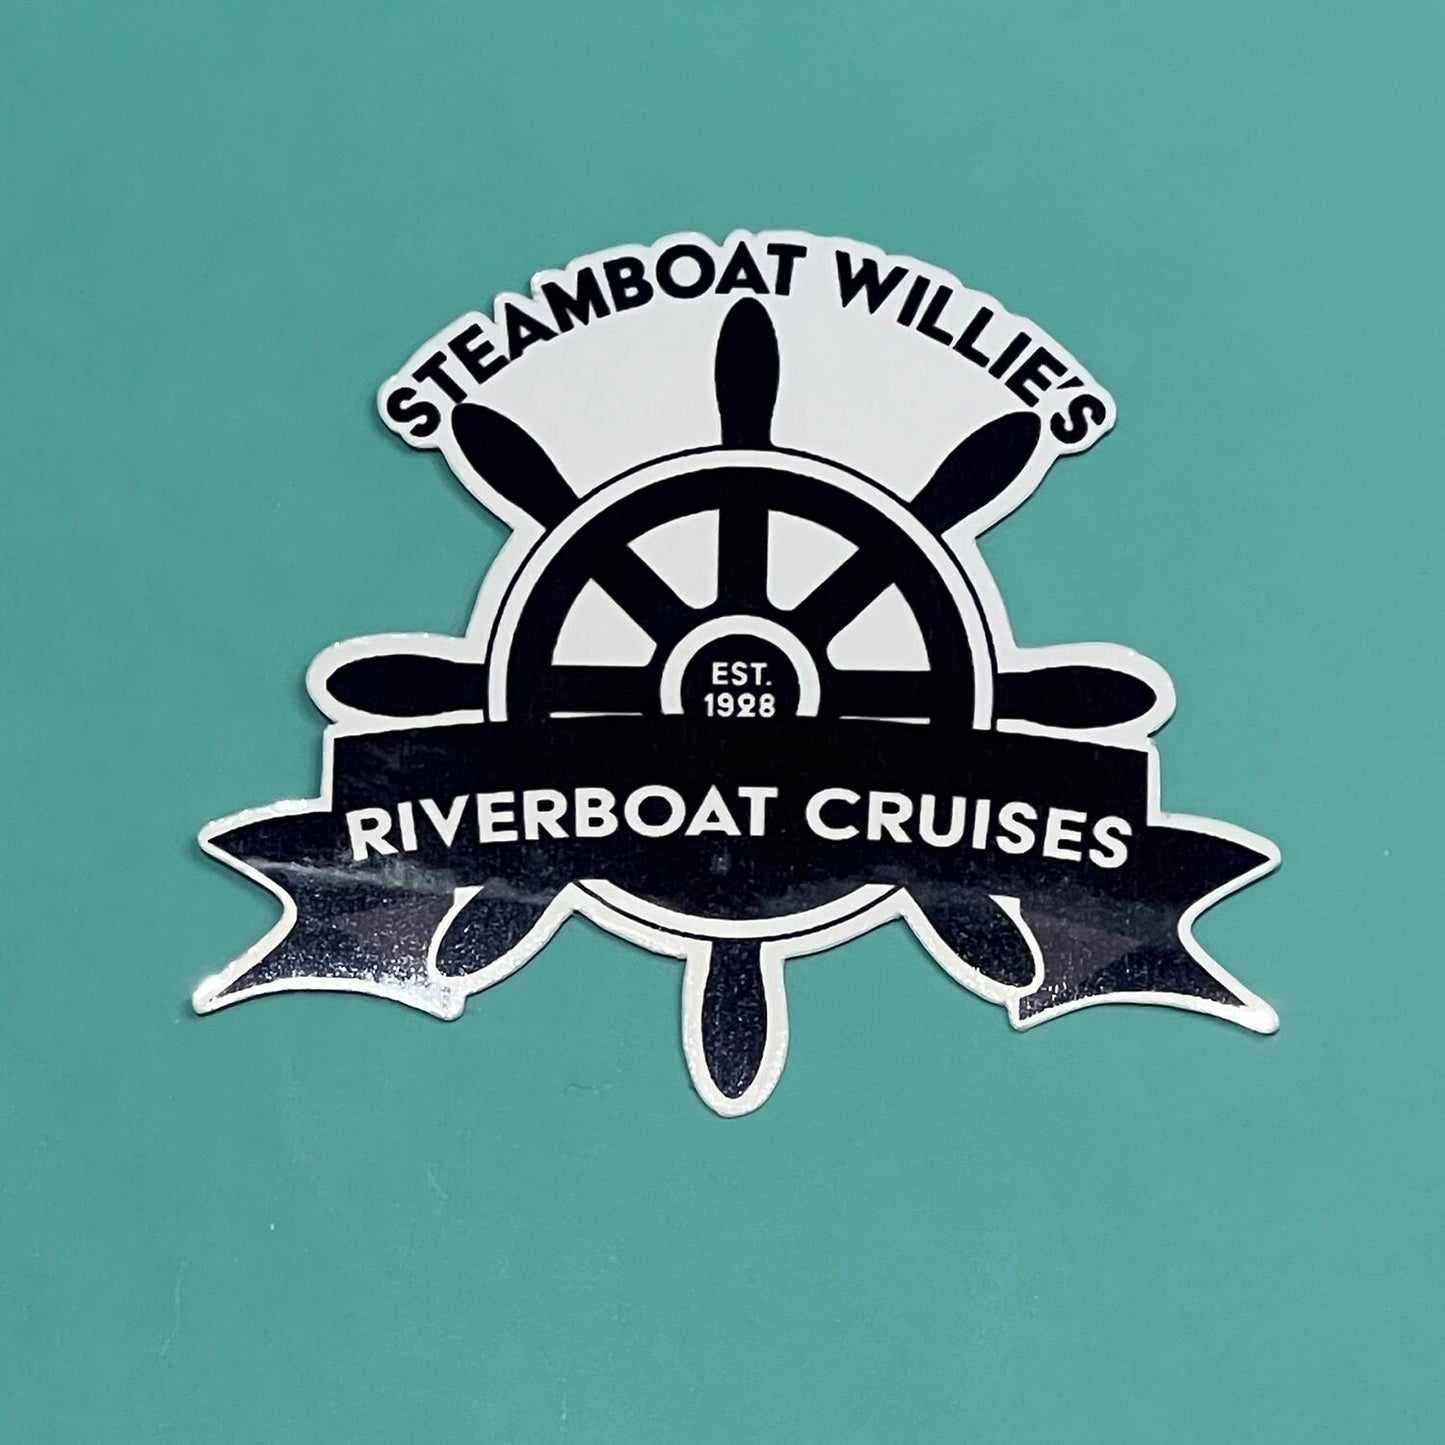 Steamboat Willie's Riverboat Cruises Waterproof Stickers